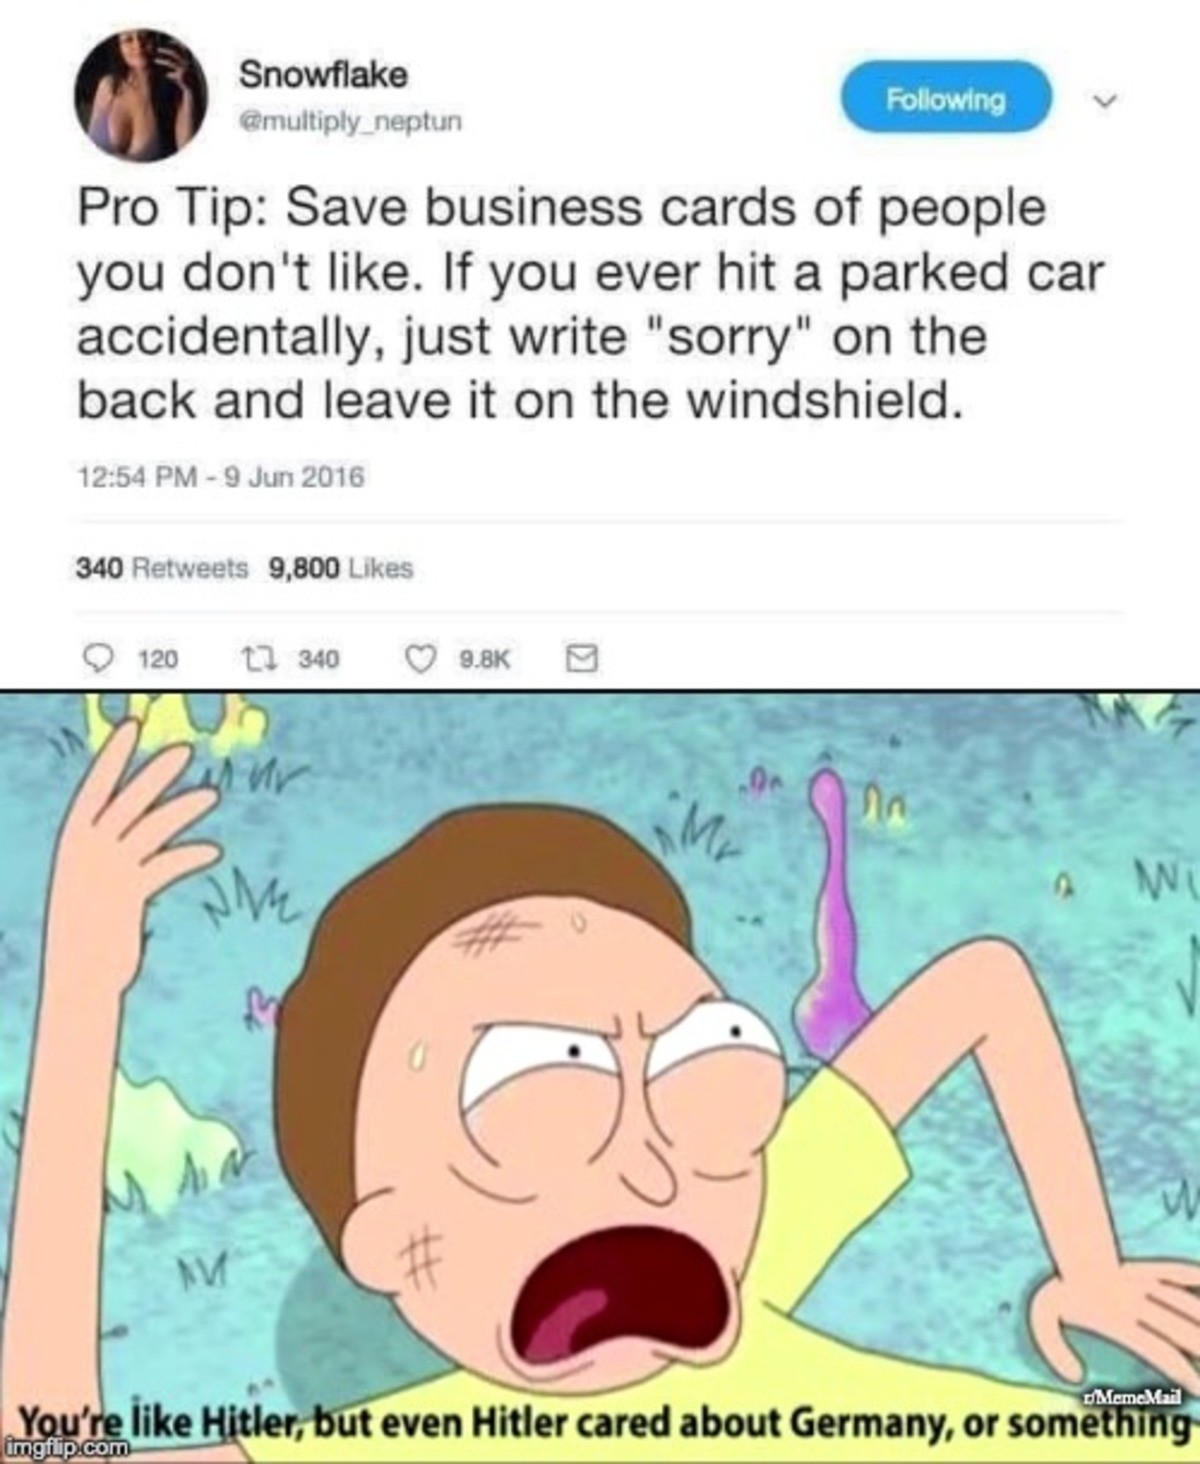 Or better yet, MAKE business cards with your enemies details on them - meme